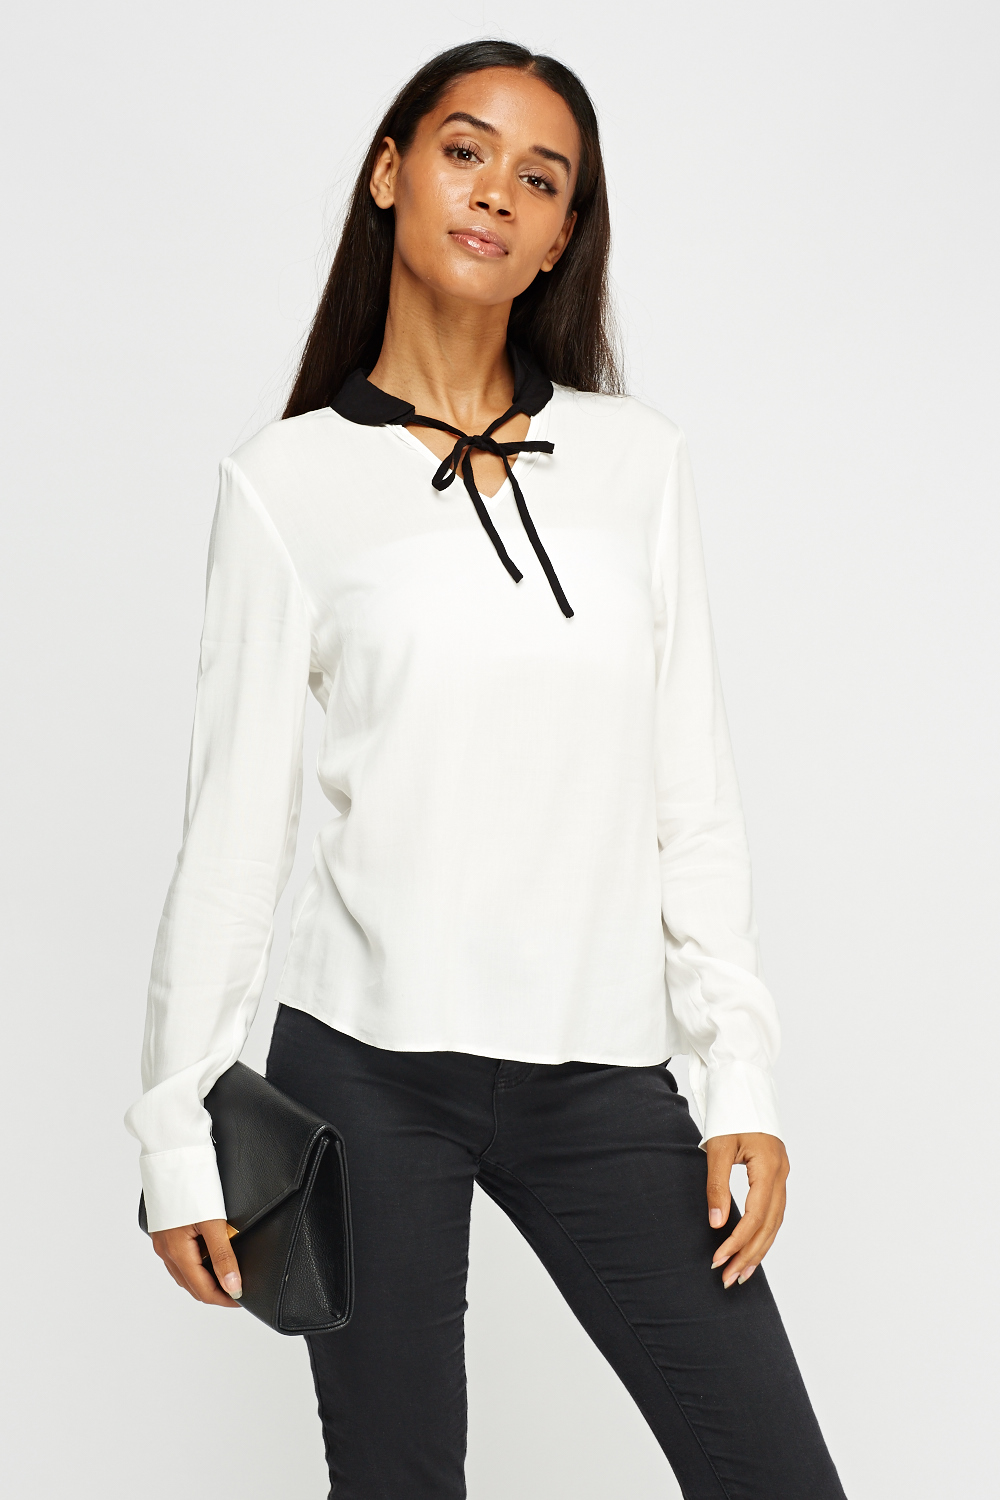 Tie Up Neck Collar Blouse - Just $7